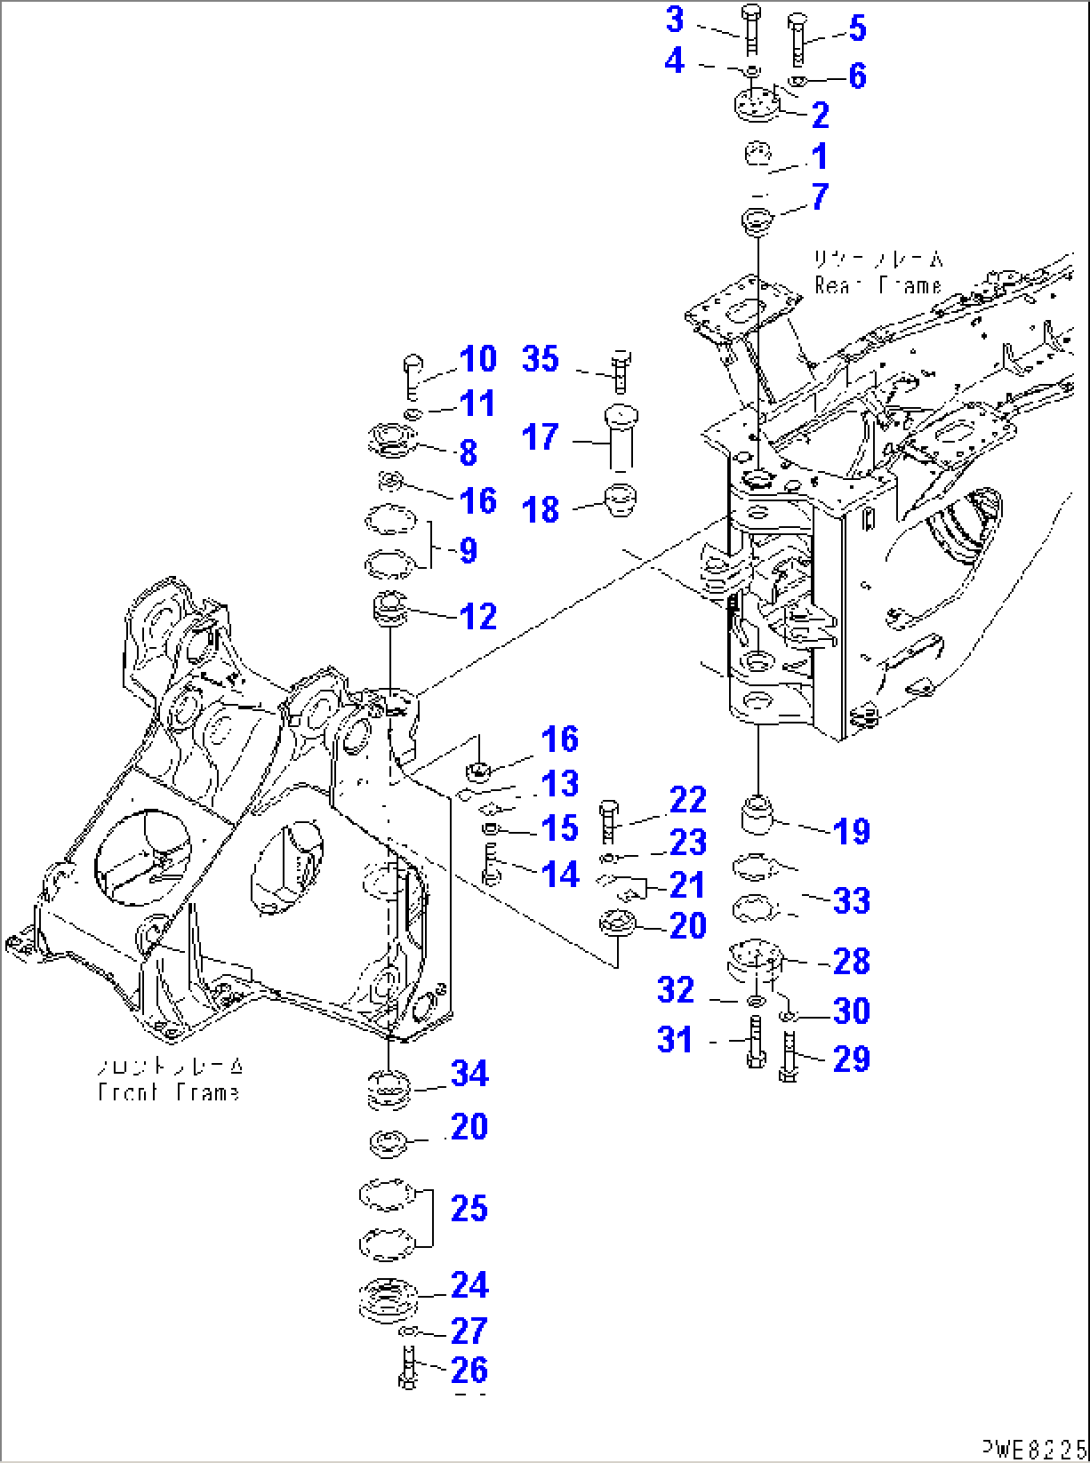 HINGE PIN (FOR FRONT AND REAR FRAME CONNECTING)(#50001-51074)